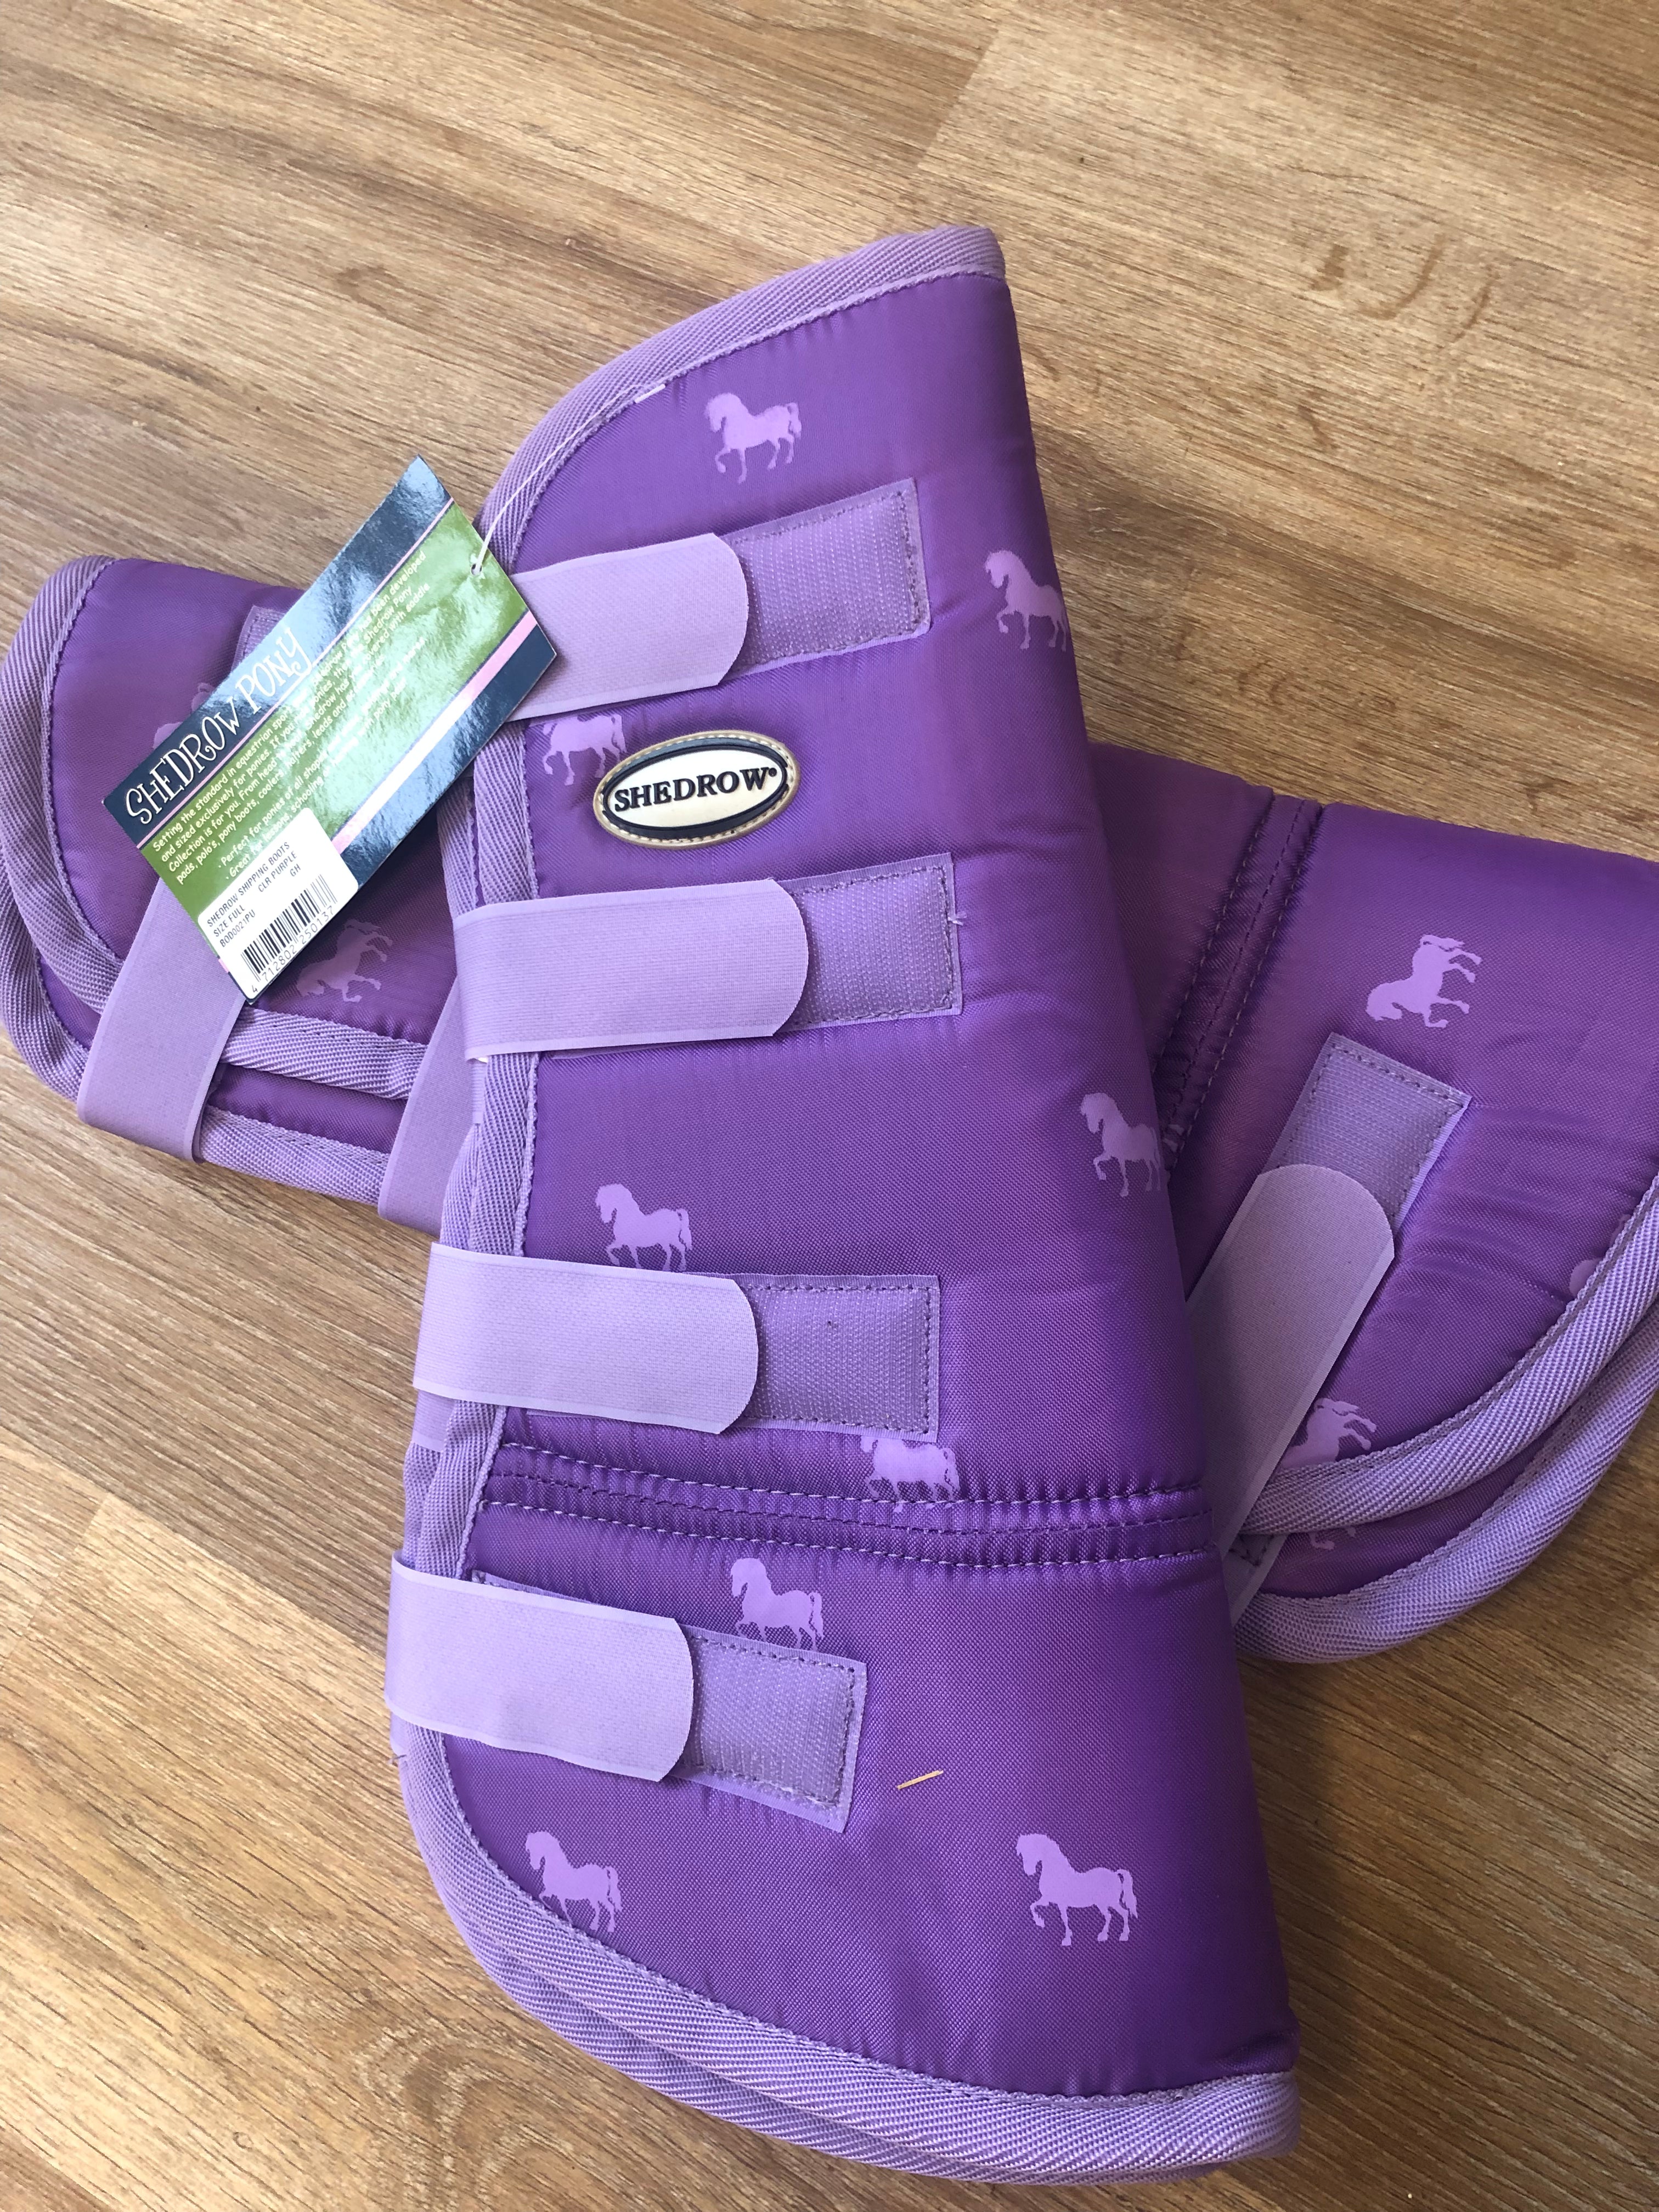 Fine Used *New Shedrow Purple Pony Shipping Boots